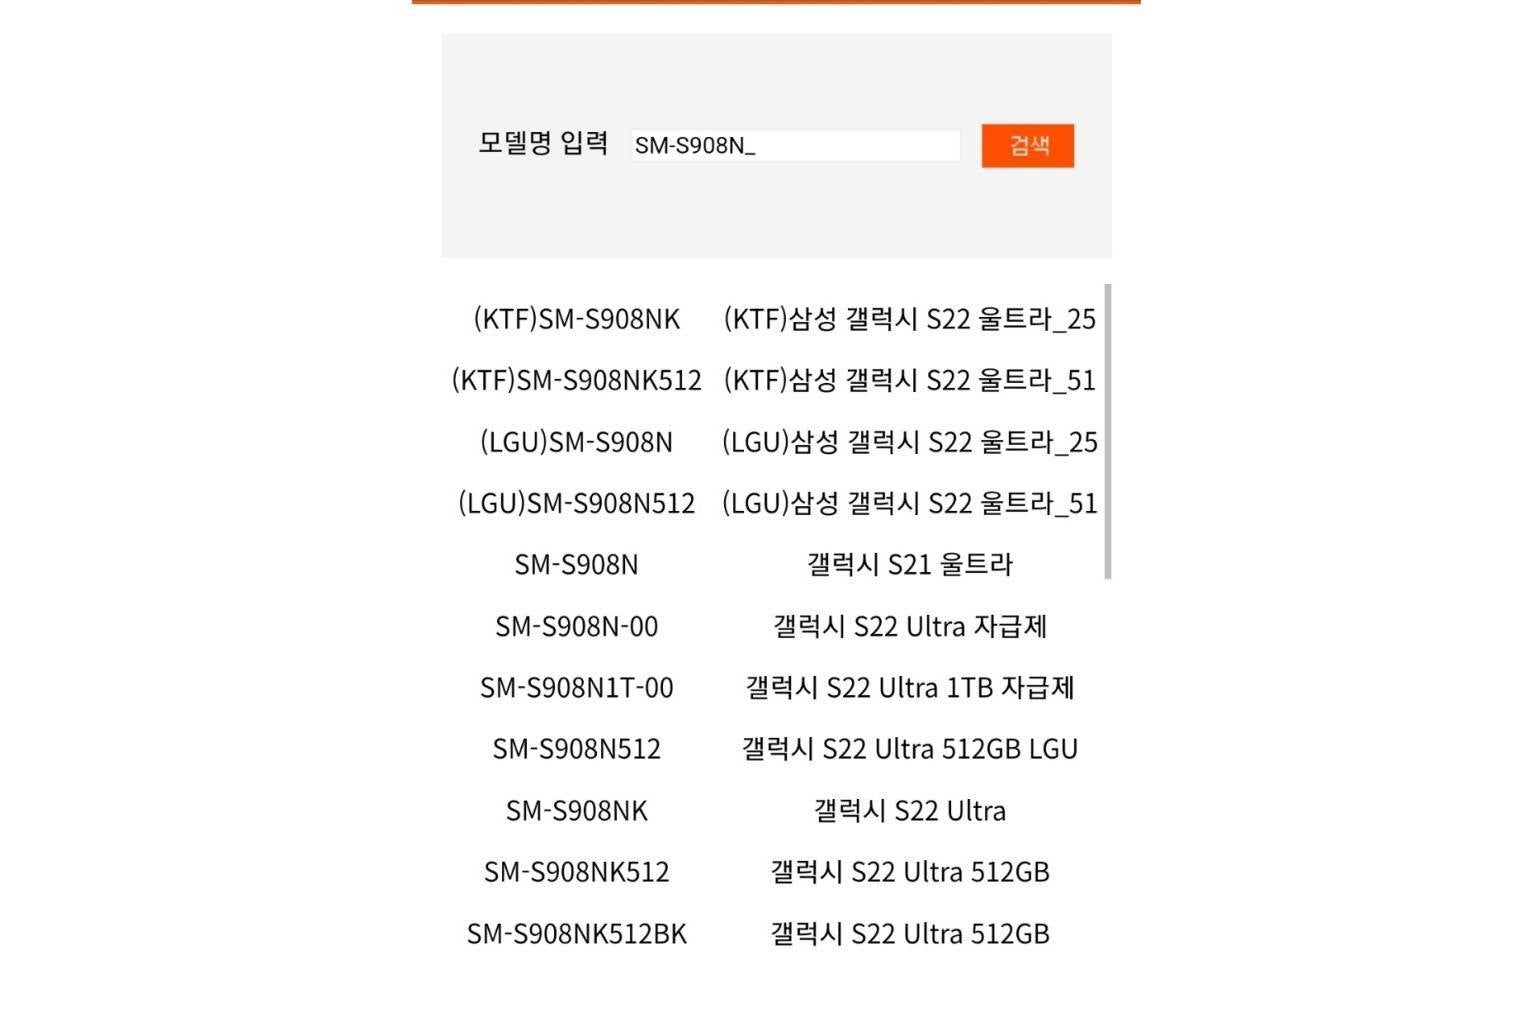 Document originating from a Korean telecommunication company seemingly confirms the existence of the 1TB Galaxy S22 Ultra - Looks like North American customers will miss out on the best Galaxy S22 Ultra model